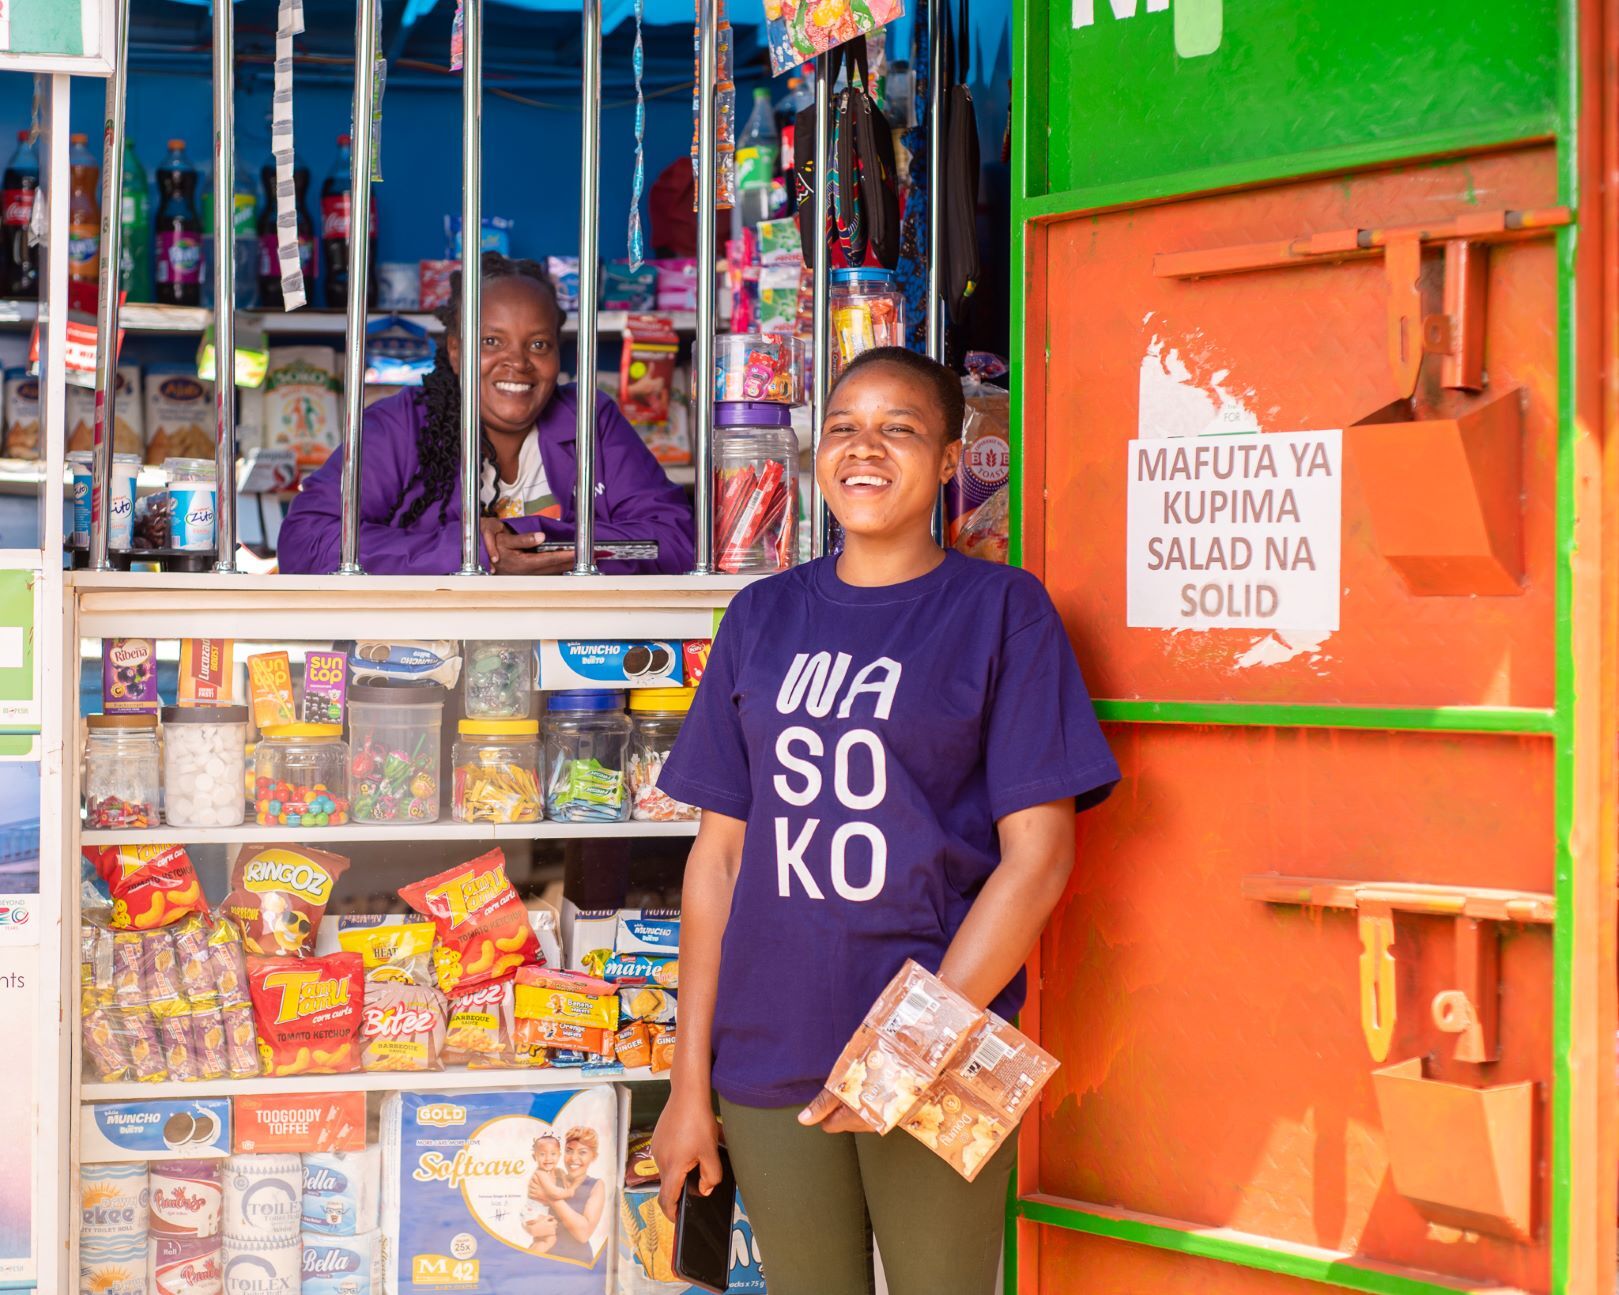 Through Wasoko’s platform, informal retailers are able to order products at any time via SMS or mobile app for free same-day delivery to their stores.